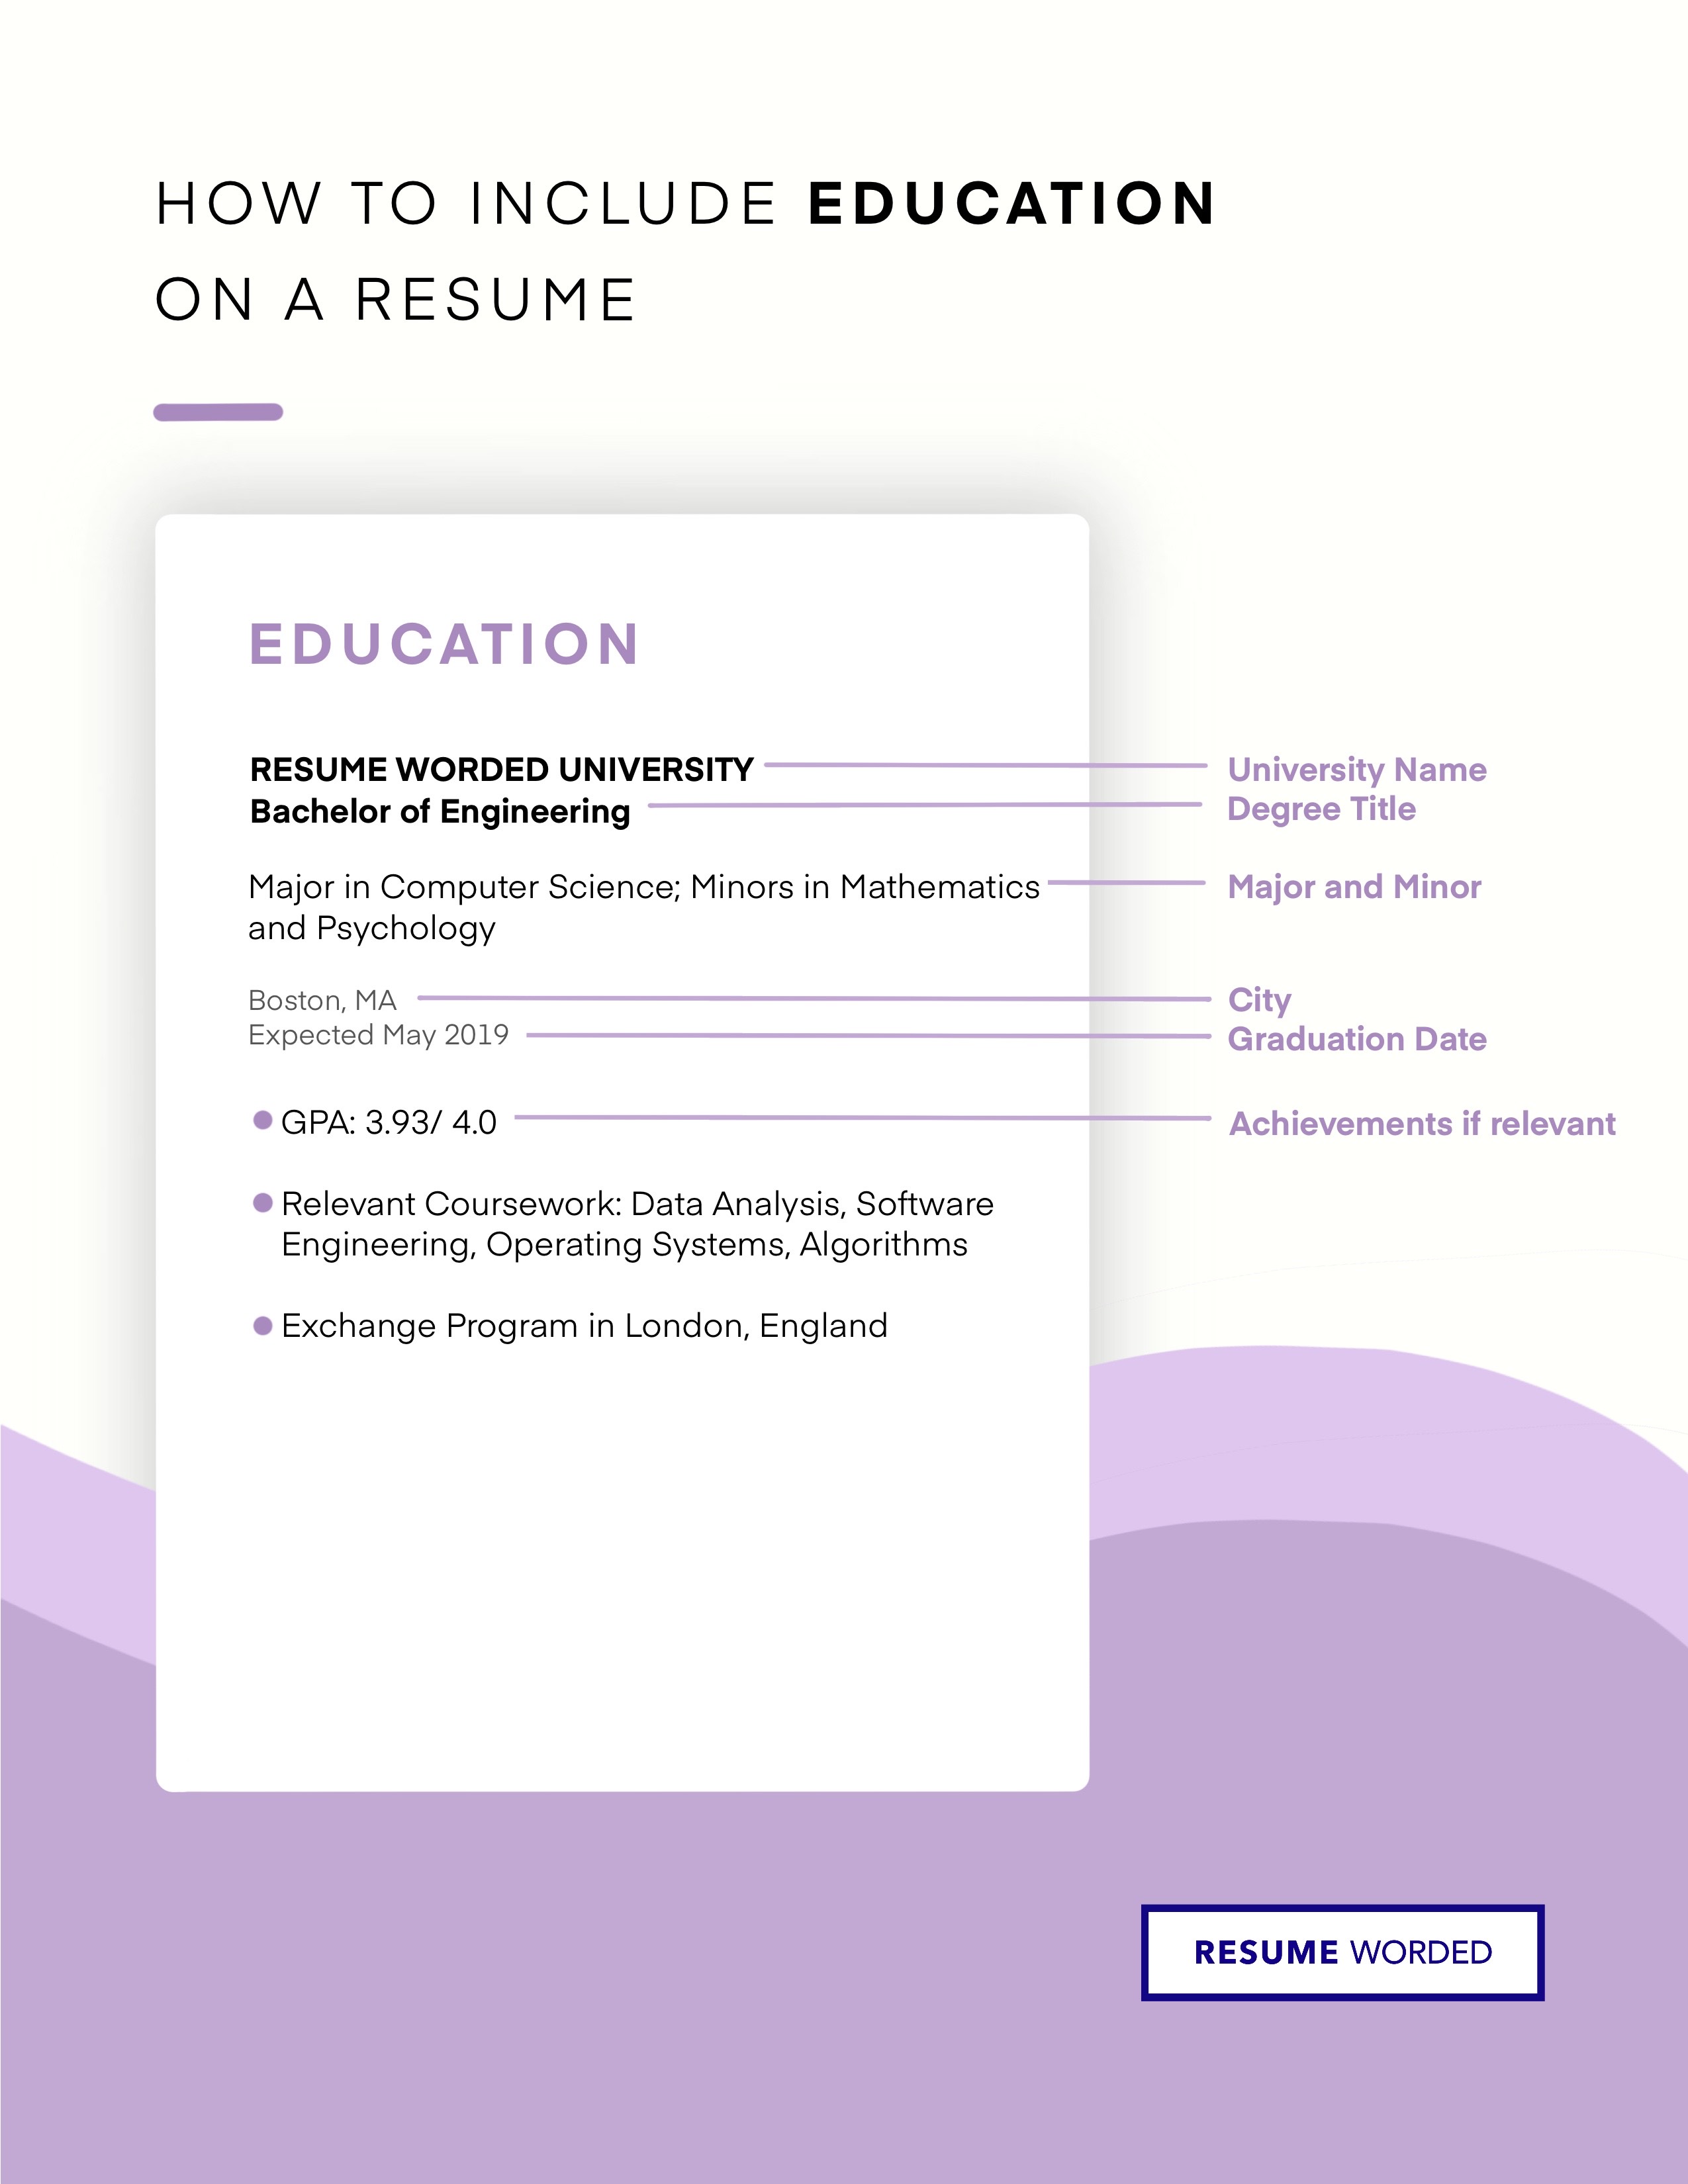 how to write education on resume